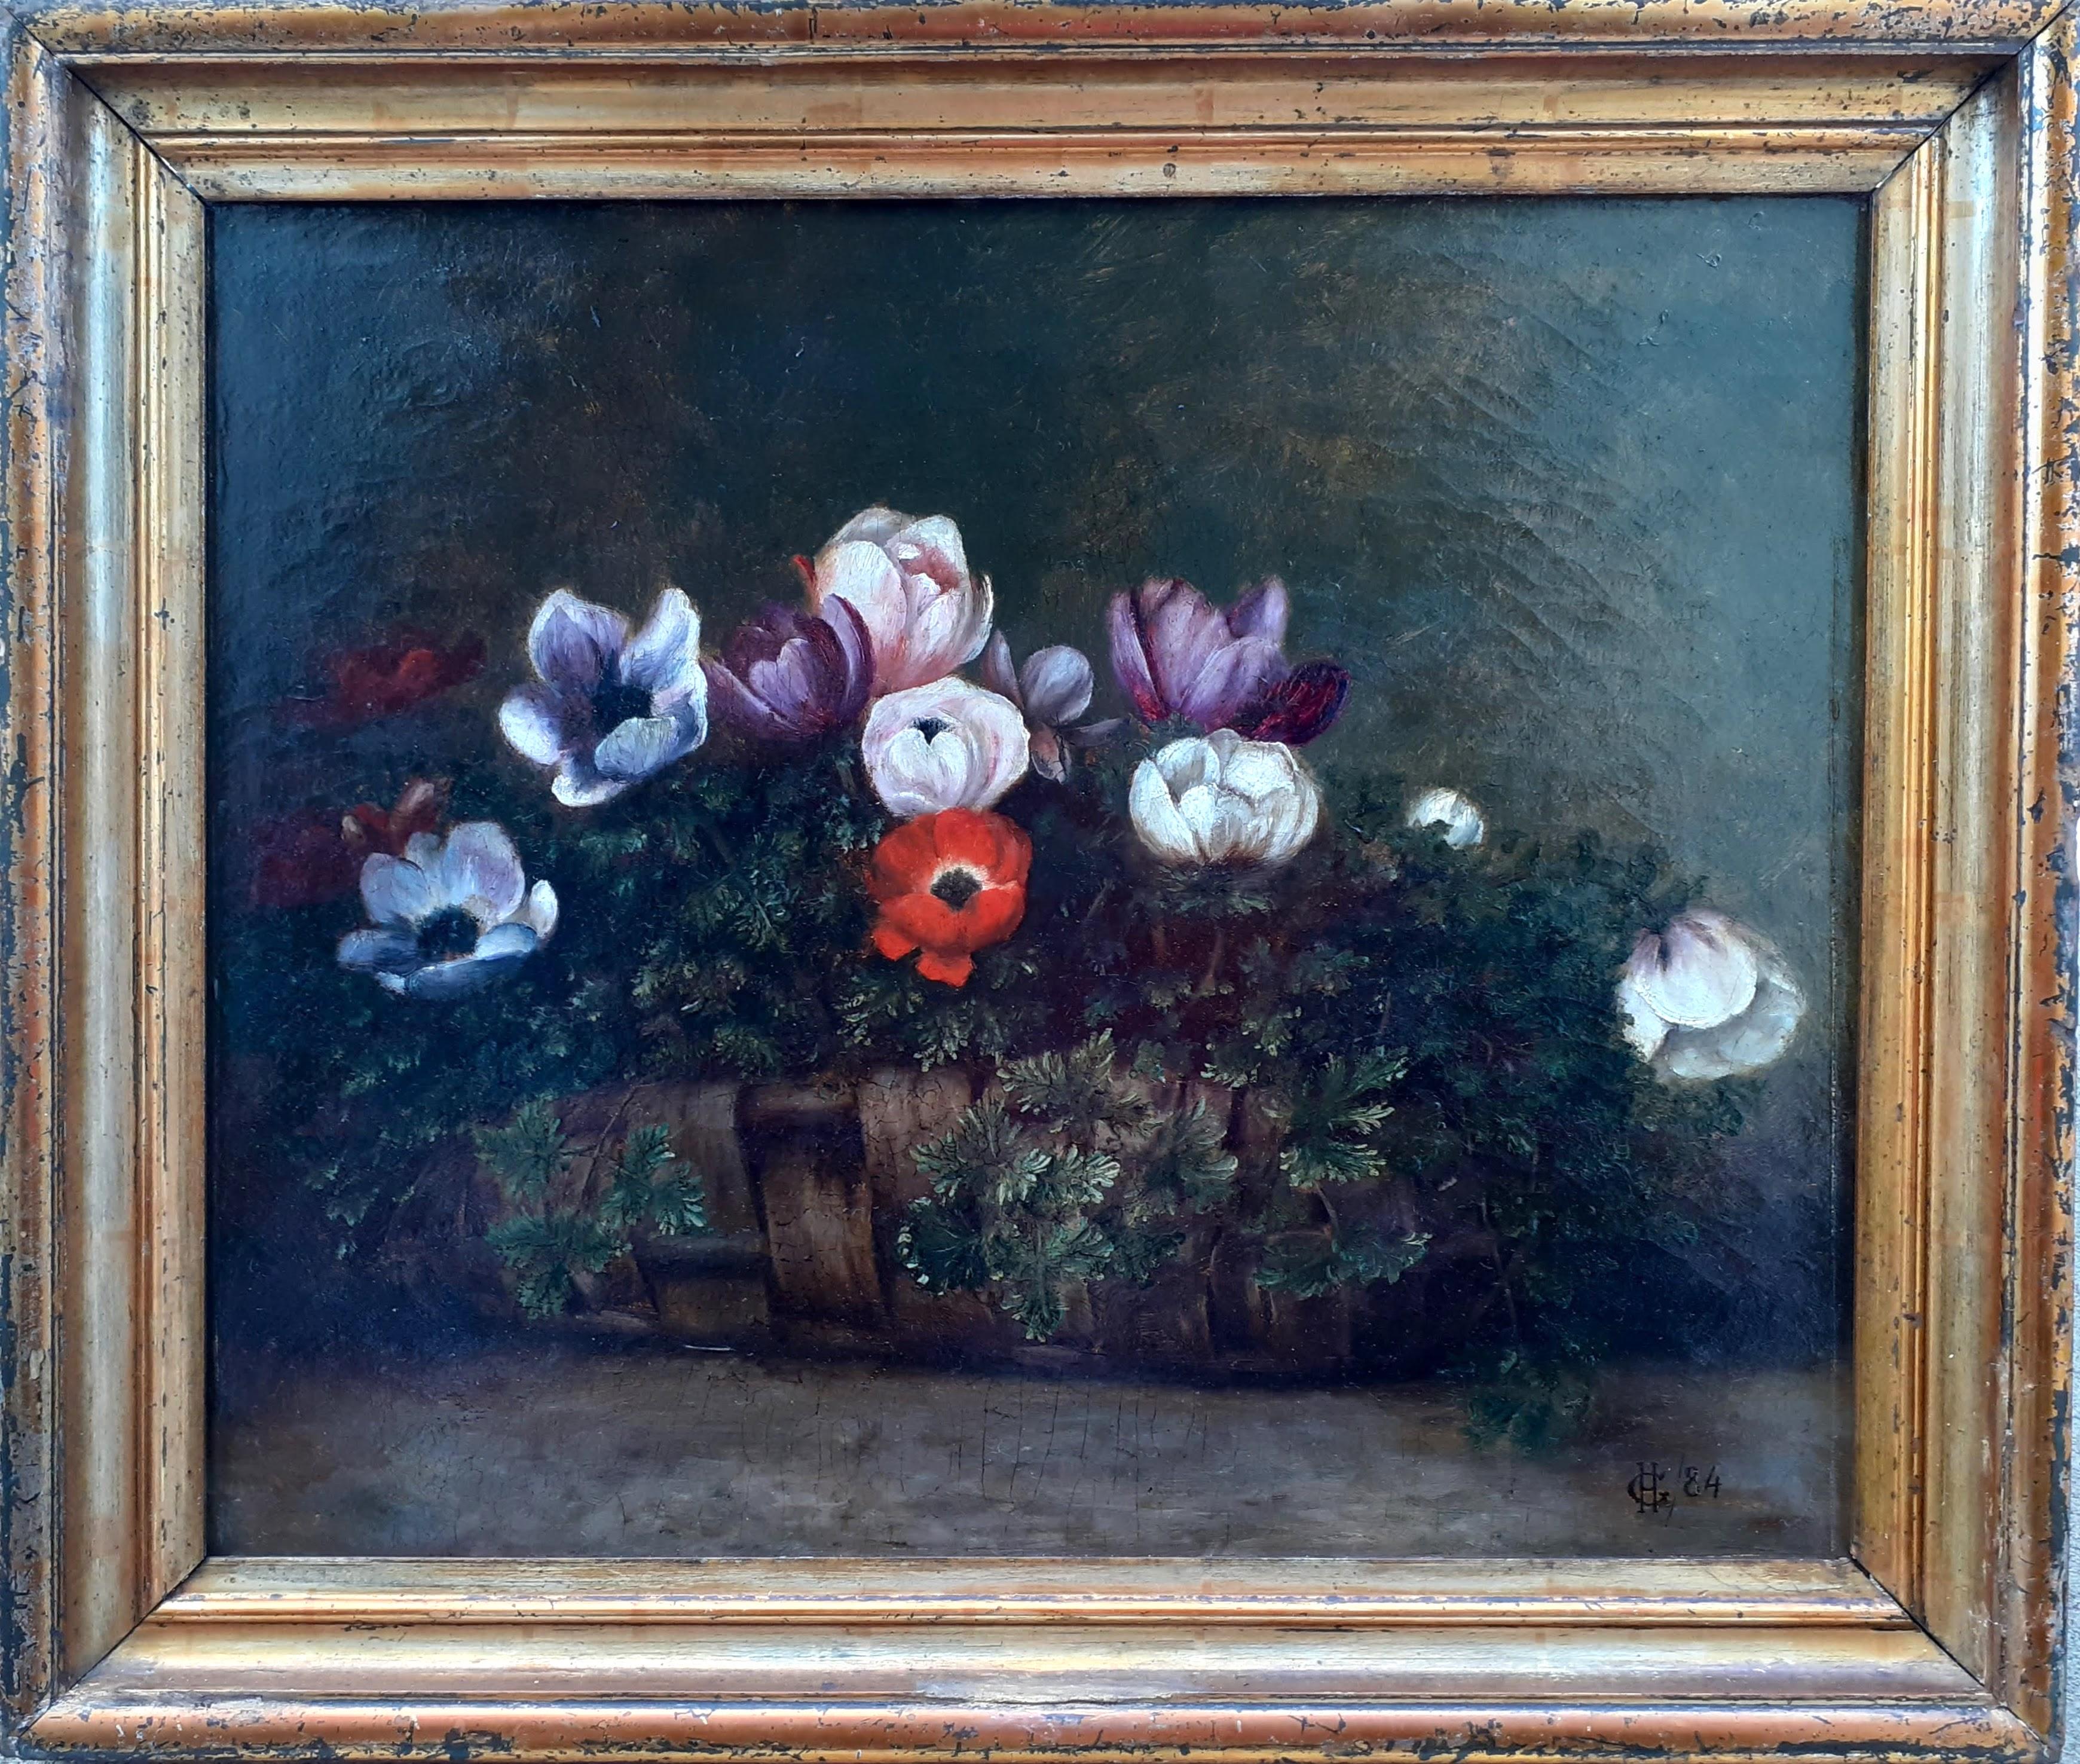 Wicket basket with Anemones a humble festive gift 19th century floral still life